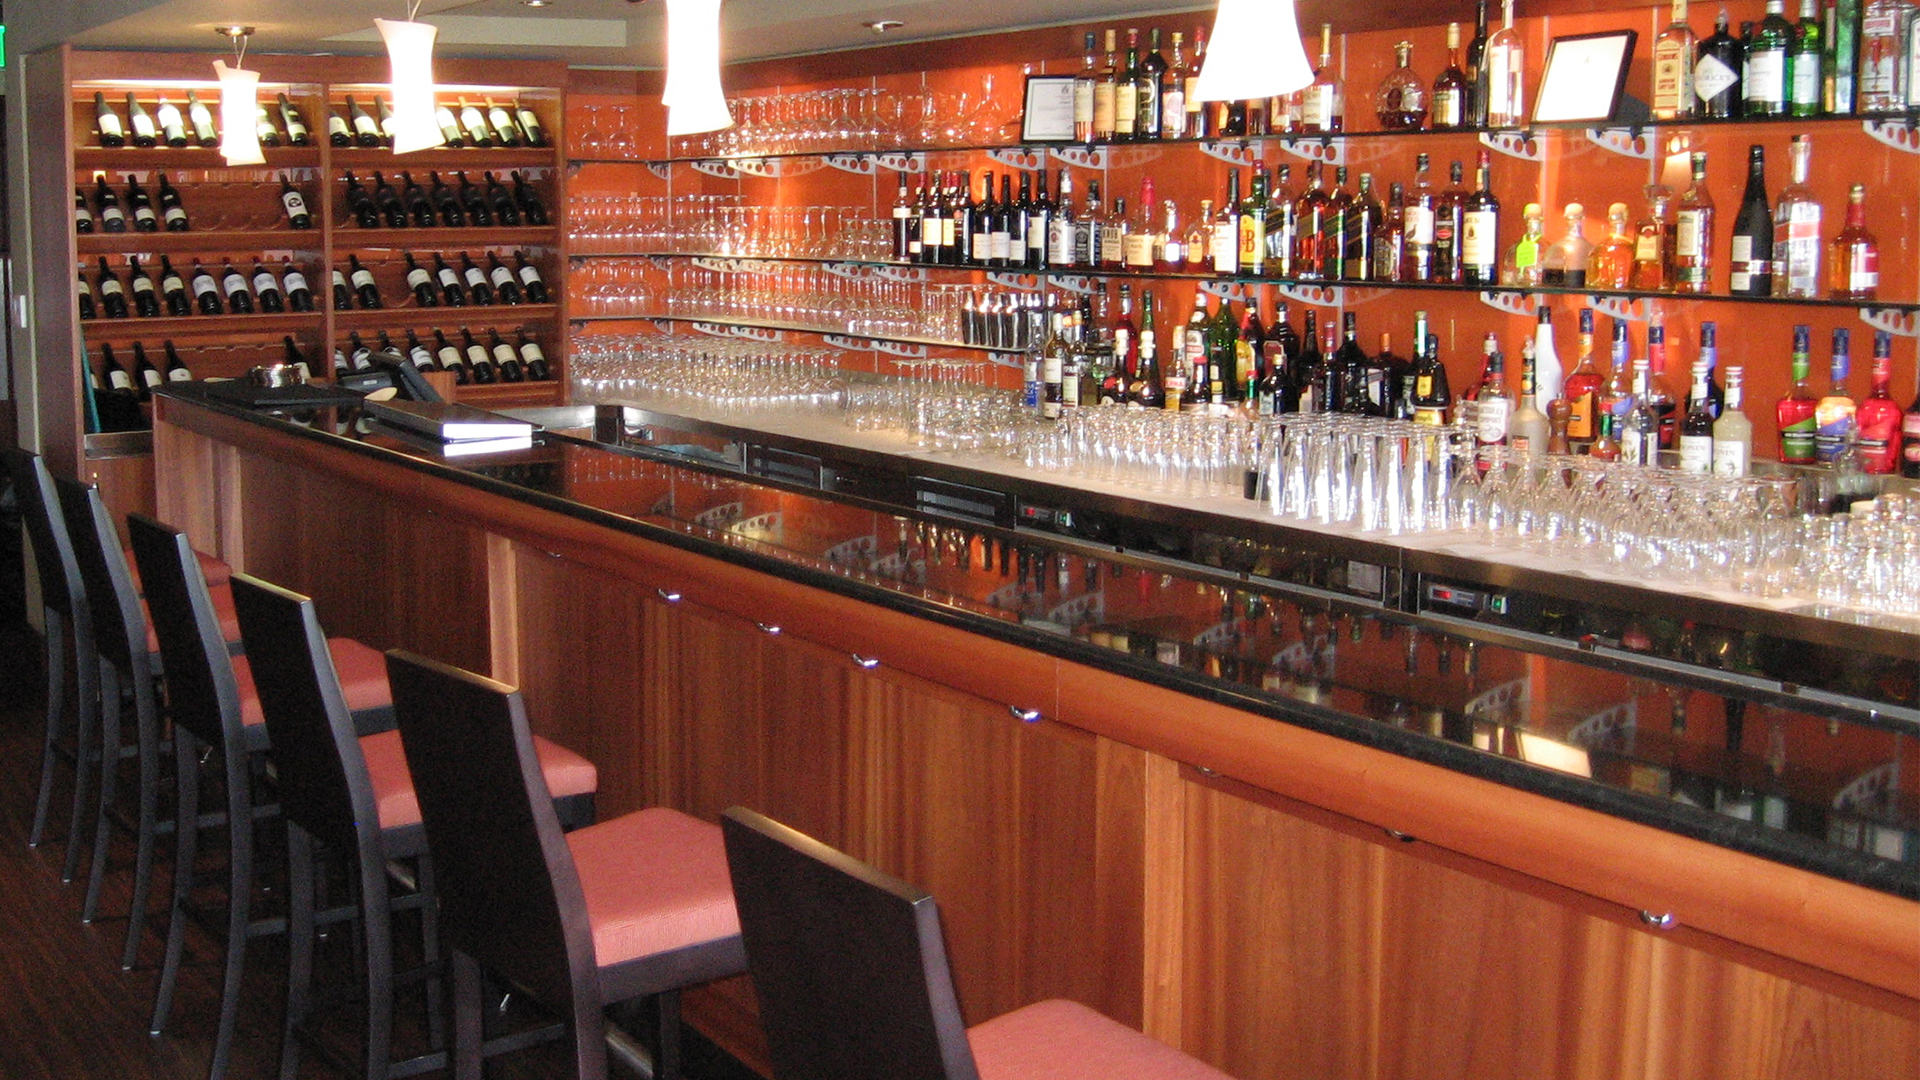 Finished Port O' Call with black and red high chairs, wood front bar with smooth glossy bar top, liquor bottles shown behind